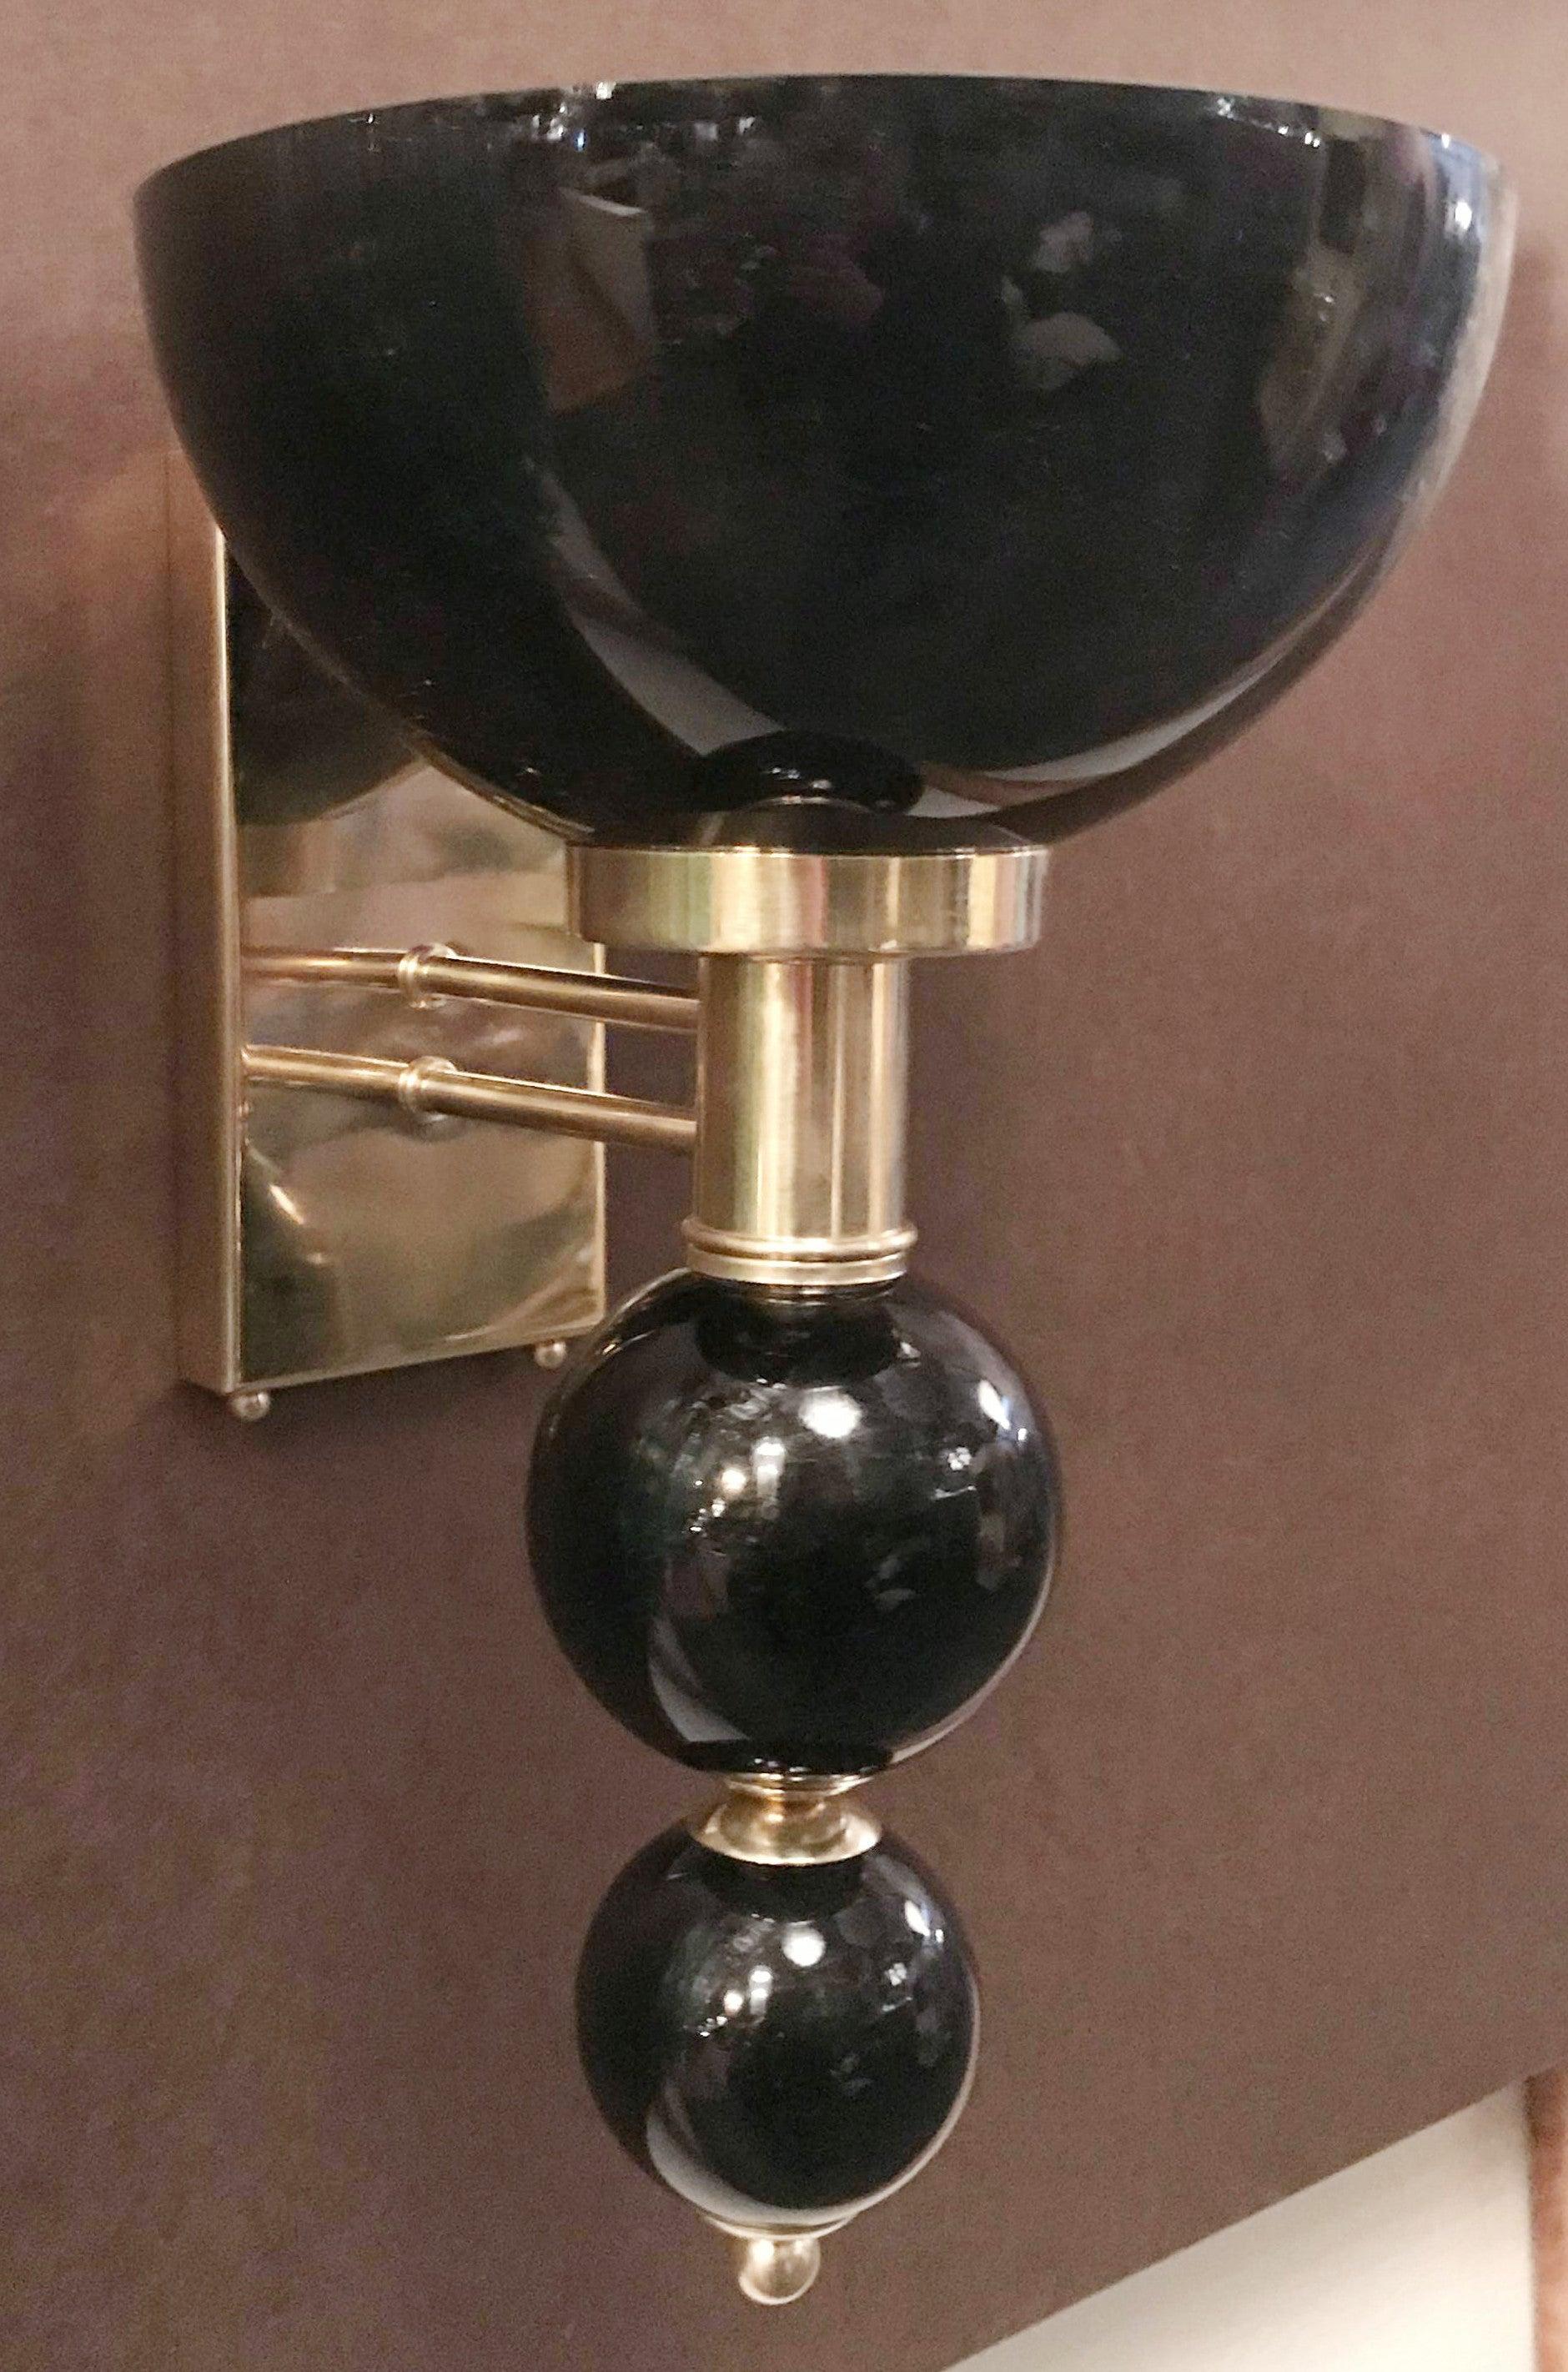 Italian wall light with hand blown black Murano glass, mounted on polished brass metal finish frame / Designed by Fabio Bergomi for Fabio Ltd / Made in Italy.
1 light / E26 or E27 type / max 40W 
Measures: Height 16 inches, width 10 inches, depth 11